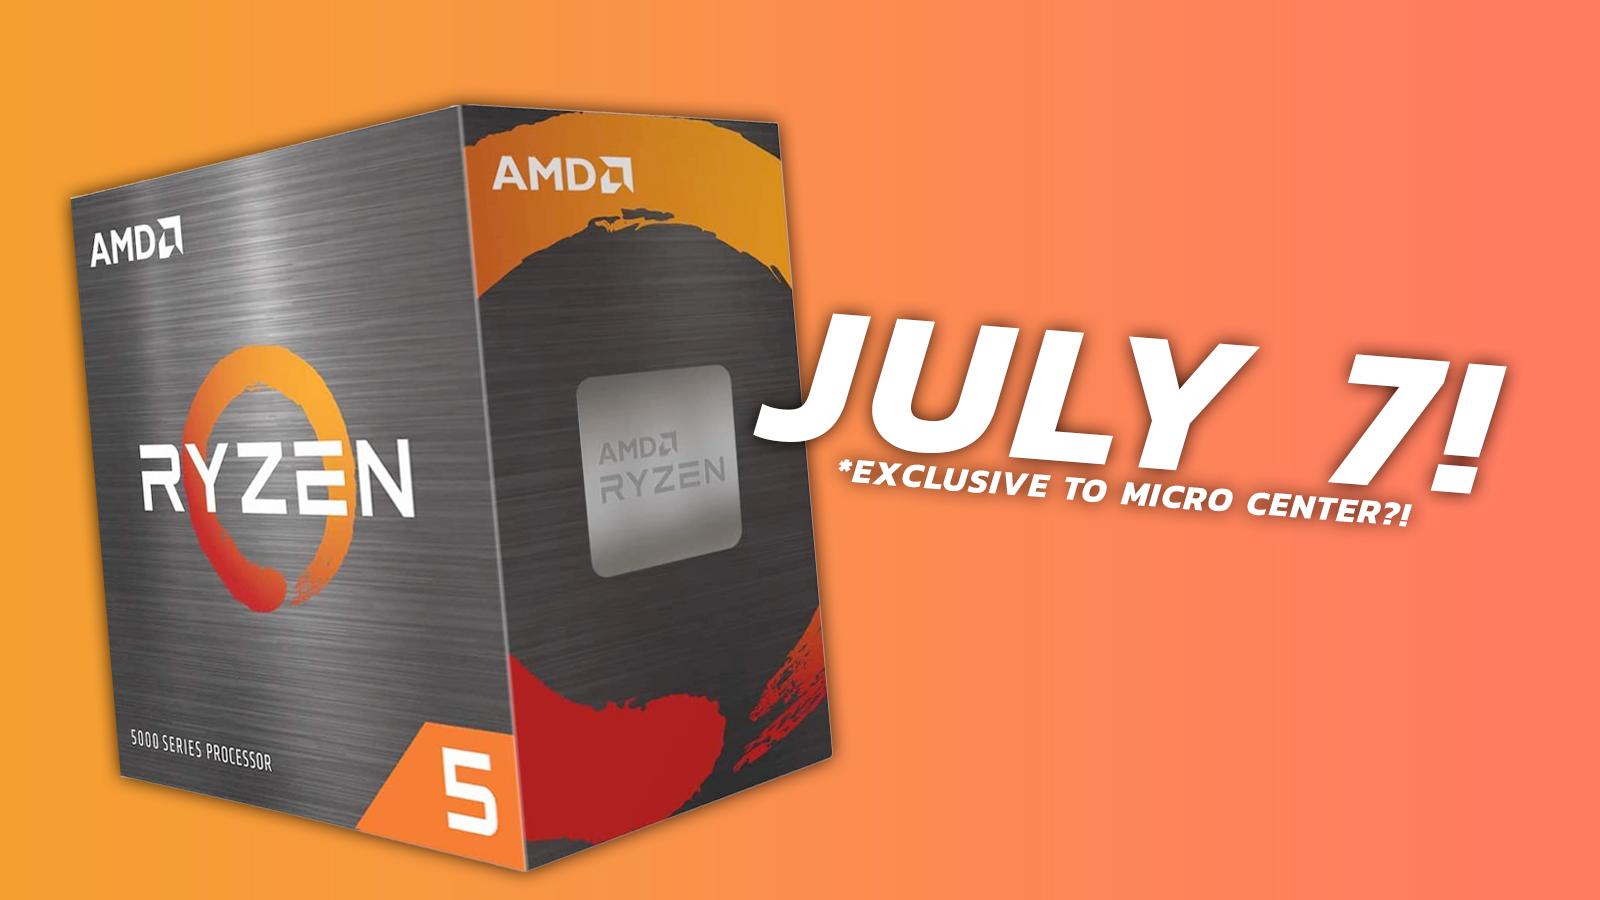 AMD 5600X3D with the date july 7 and a tiny font with an asterisk saying exclusive to micro center?!